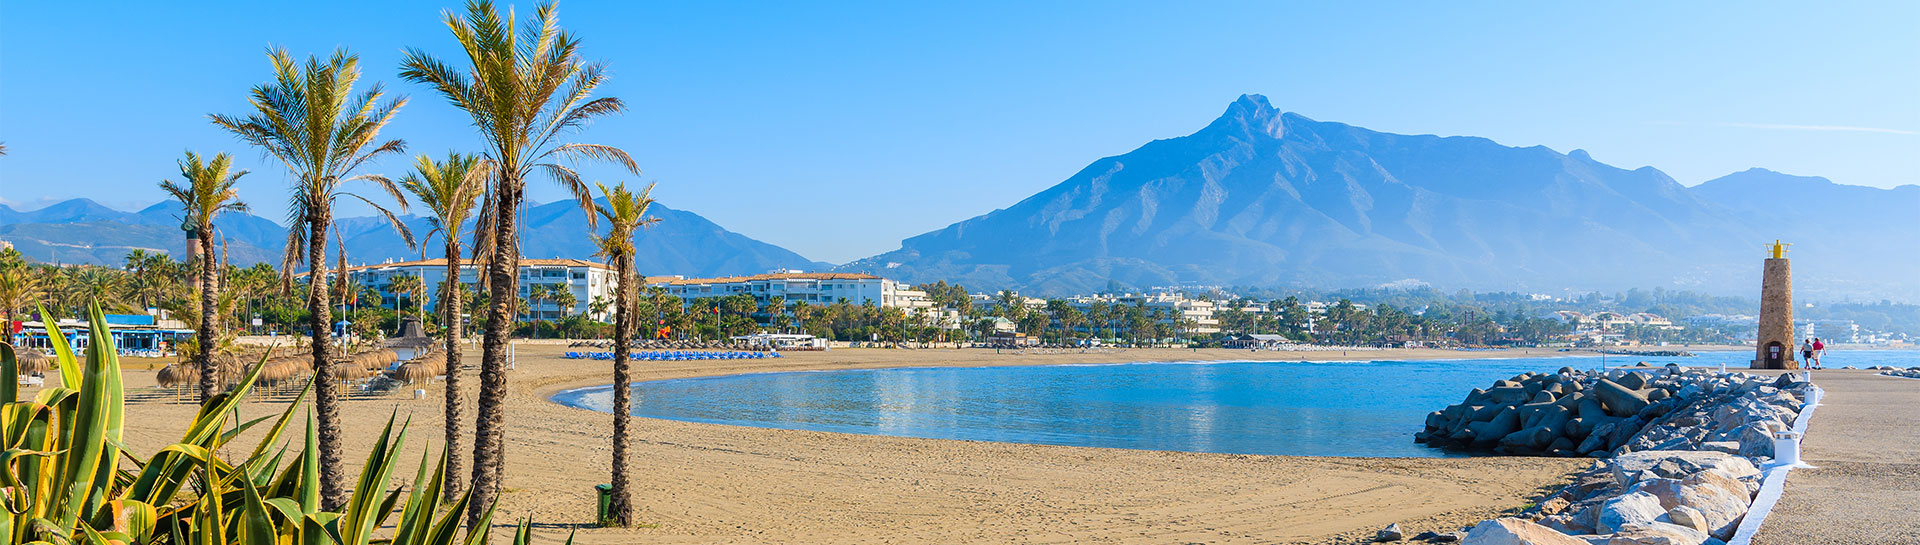 Marbella, information about this popular destination in Spain by the AFRICA MOROCCO LINK company.     